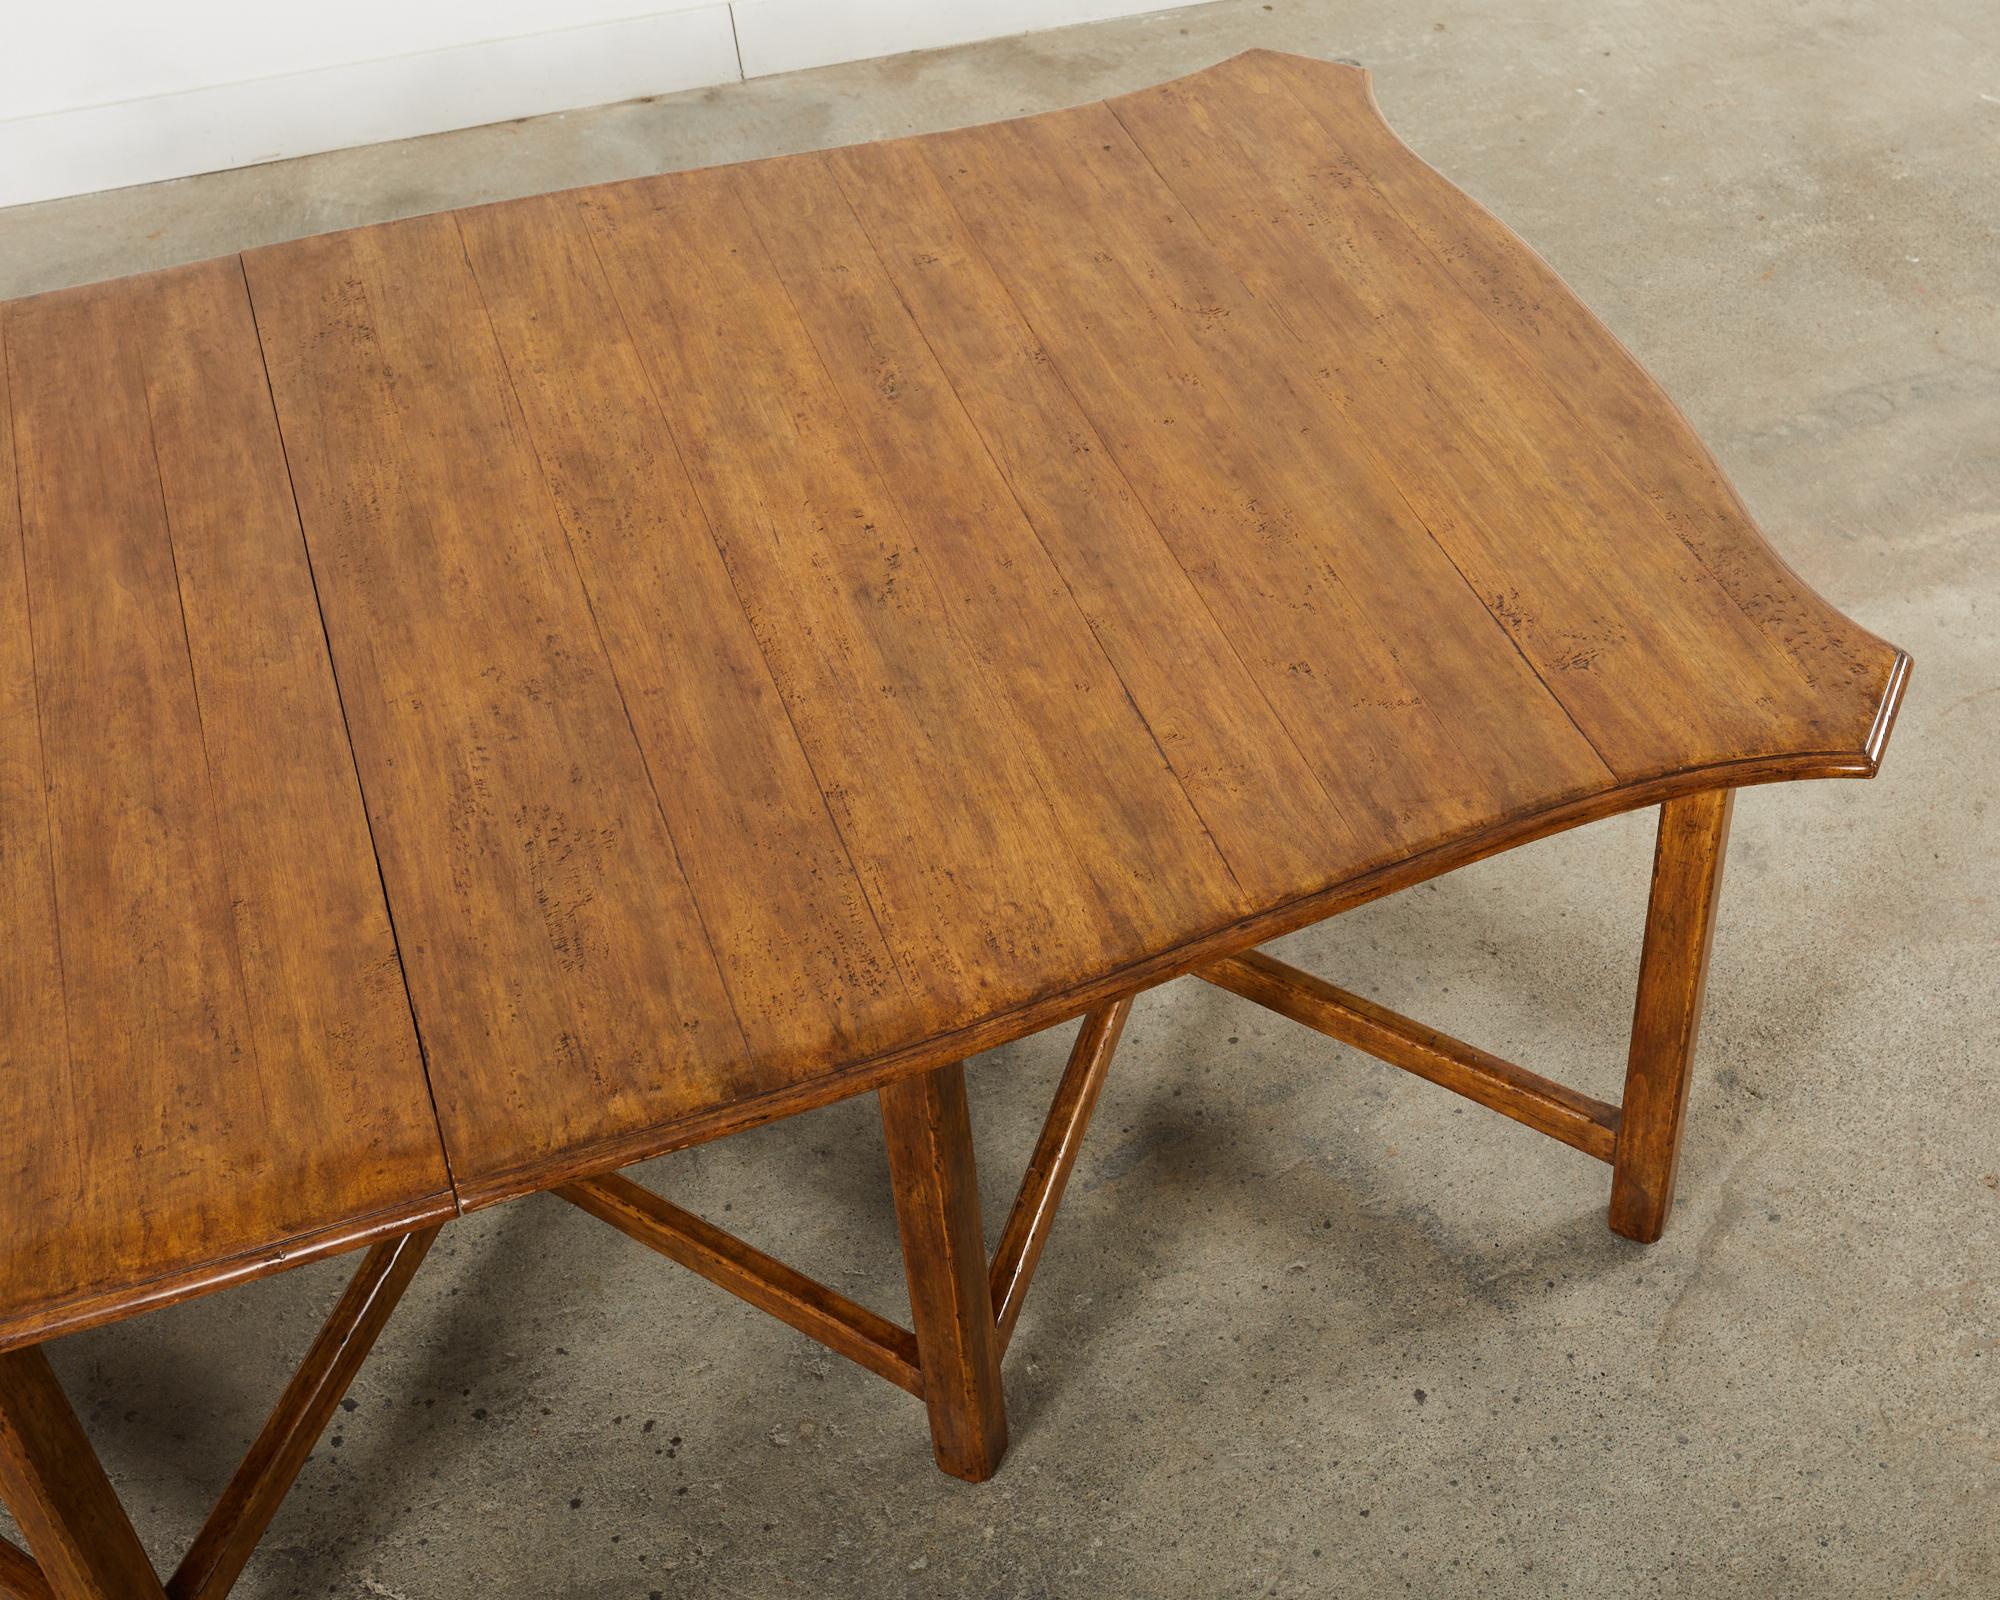 Contemporary Dennis & Leen Distressed Walnut Tuscan Dining Table 